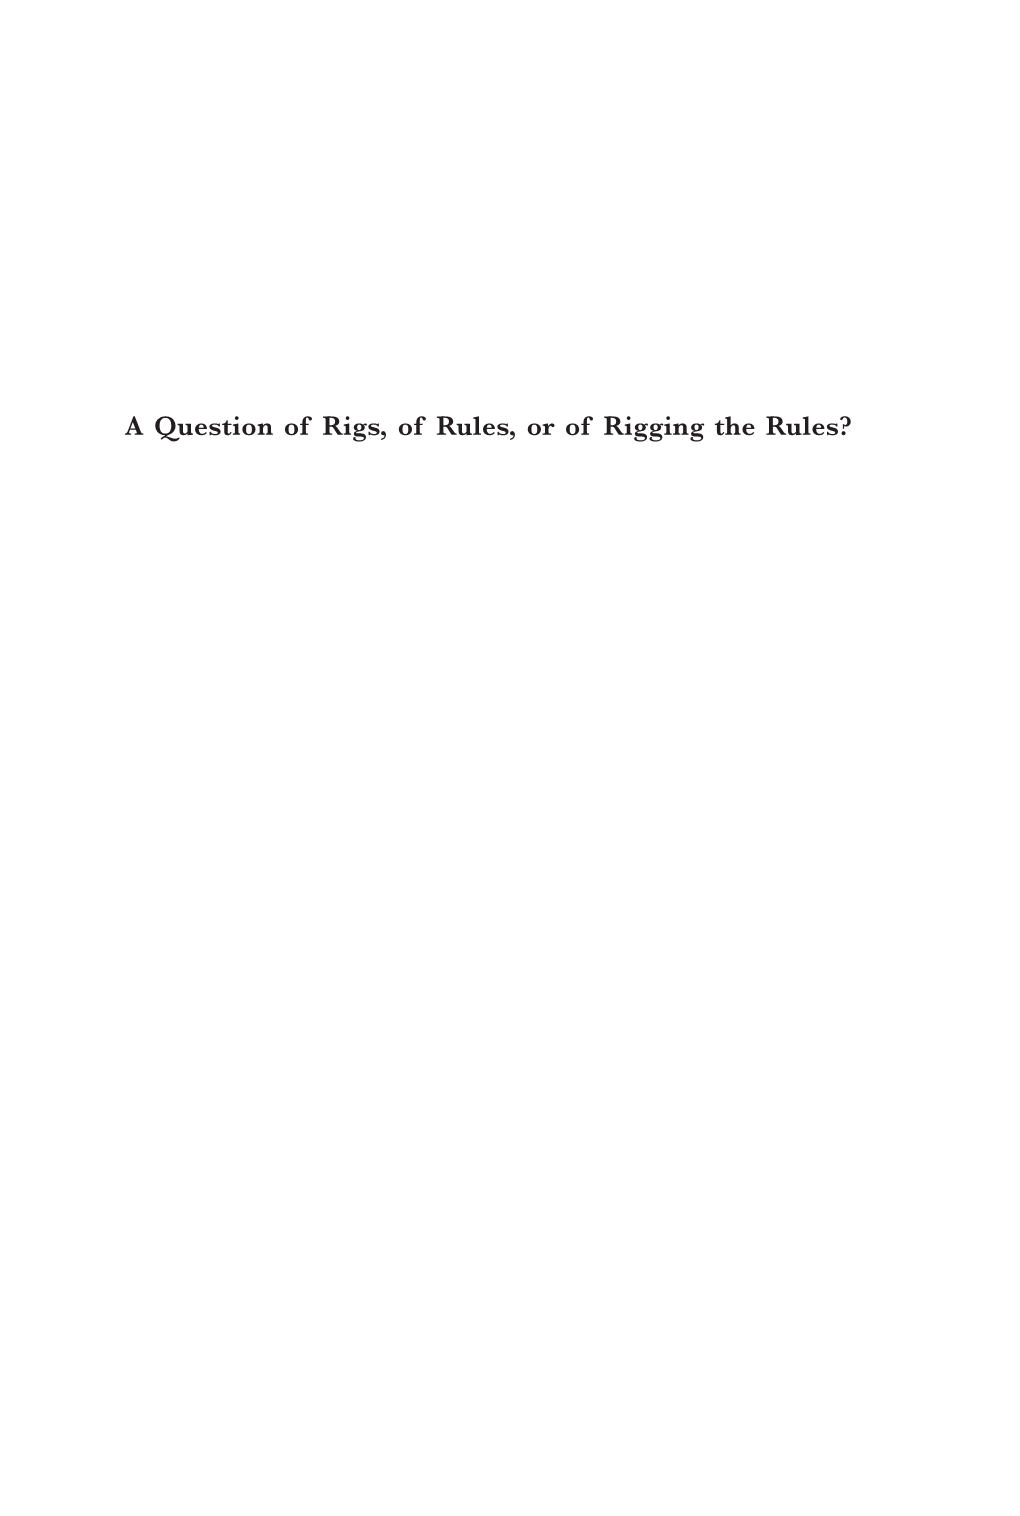 A Question of Rigs, of Rules, Or of Rigging the Rules?